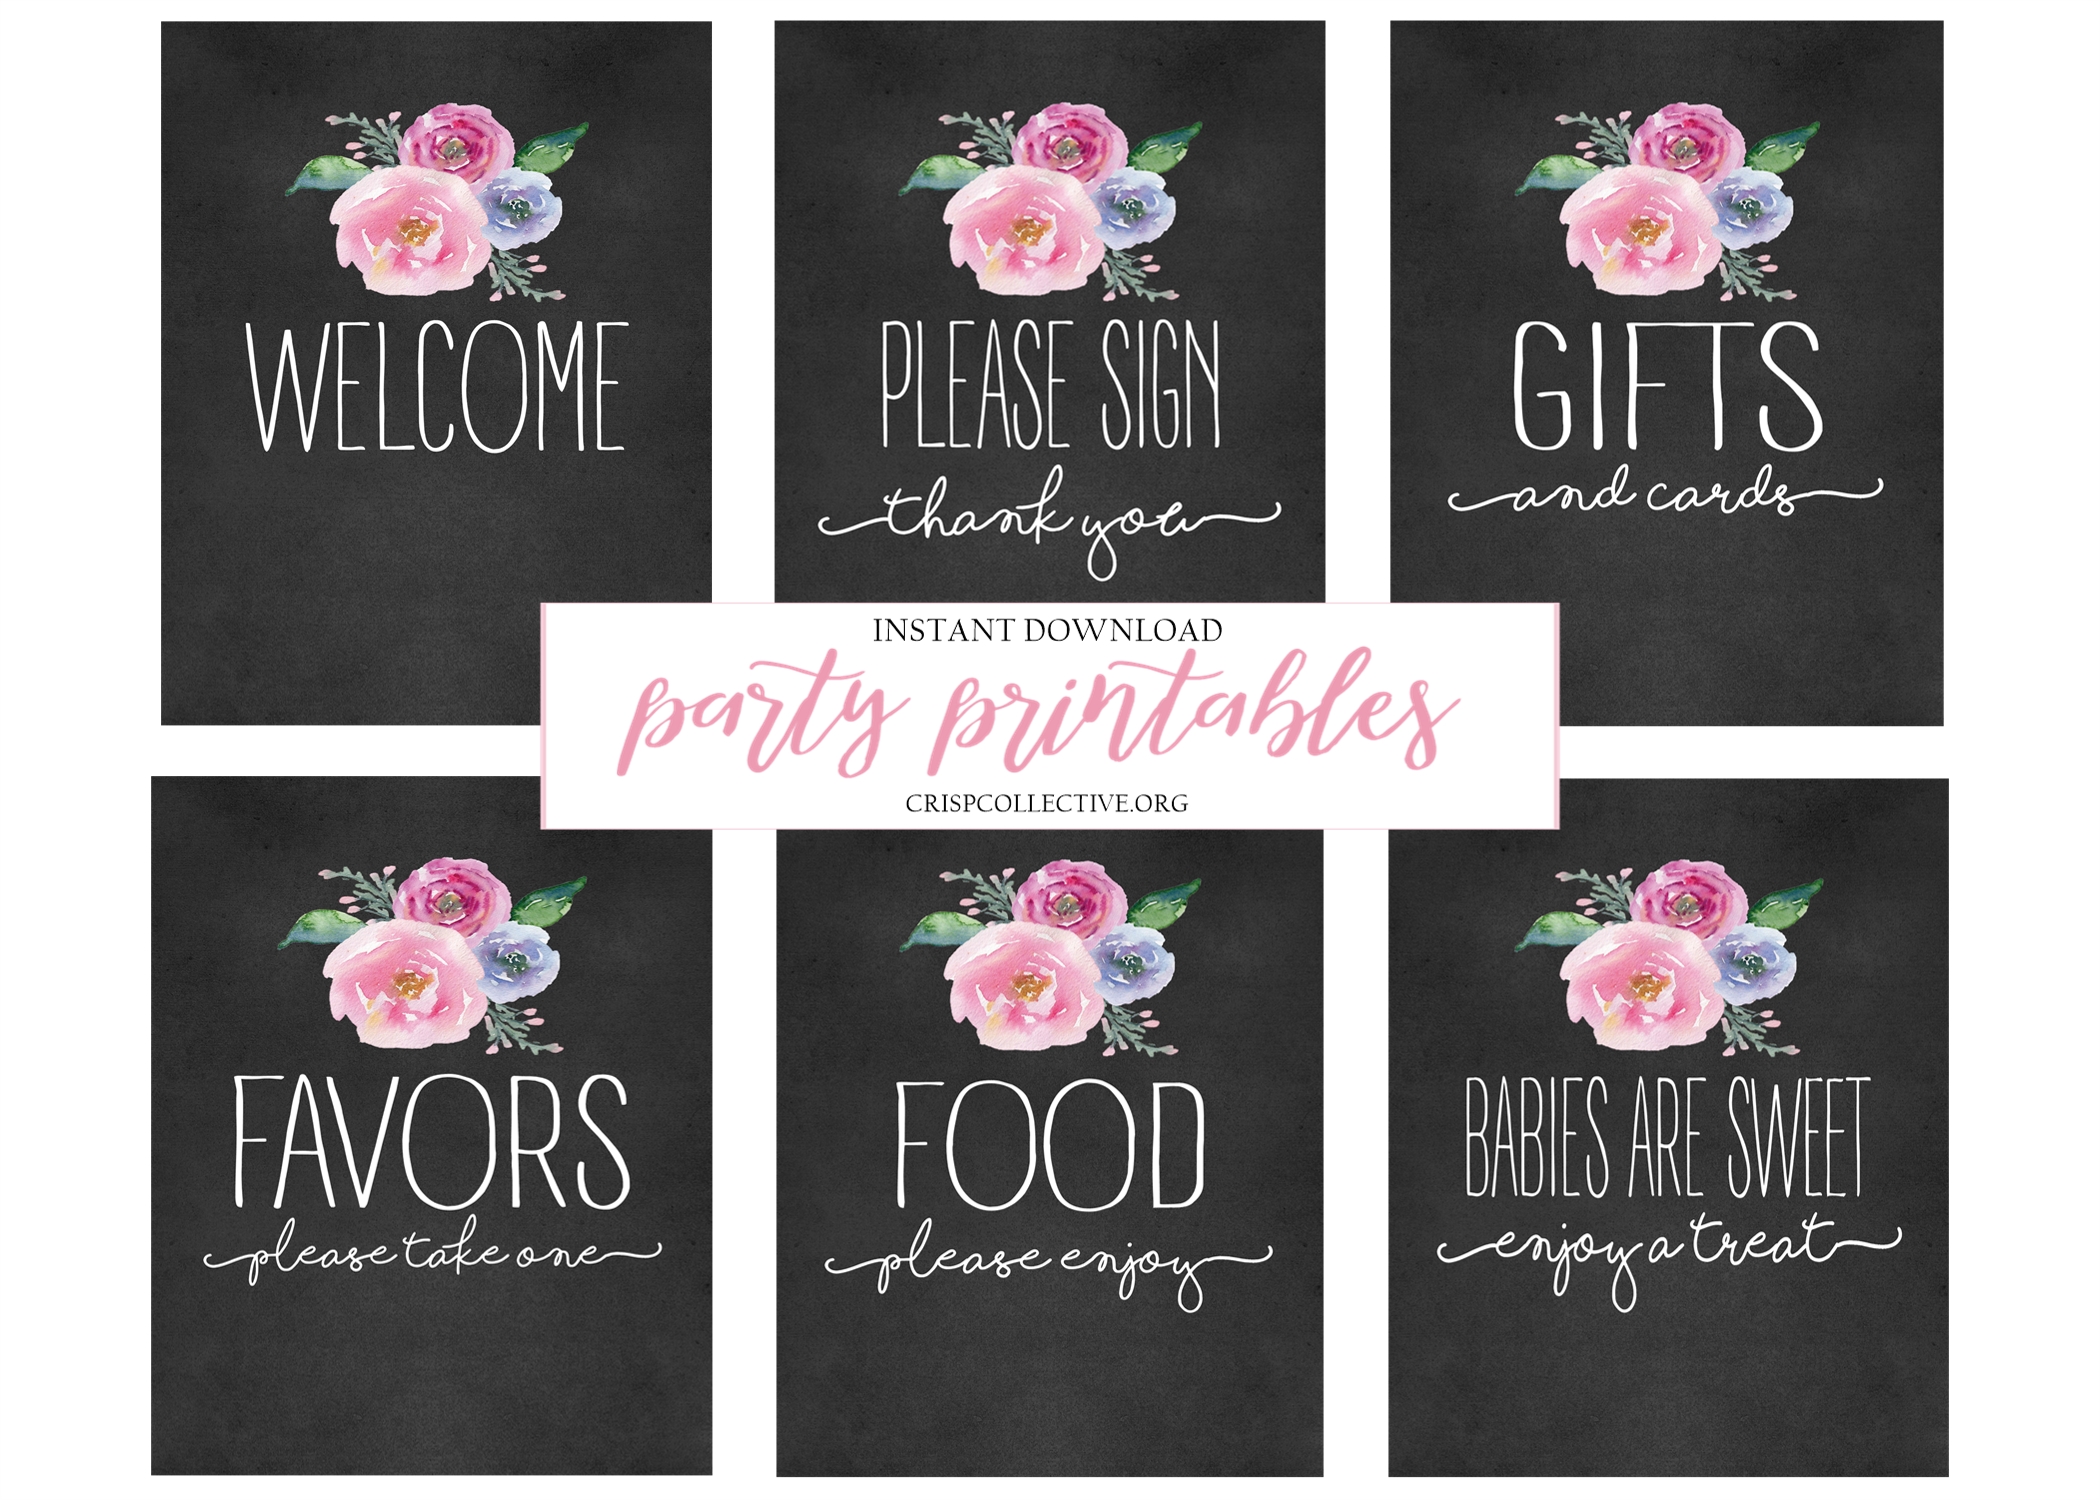 http://crispcollective.org/wp-content/uploads/2019/04/party-printables.jpg